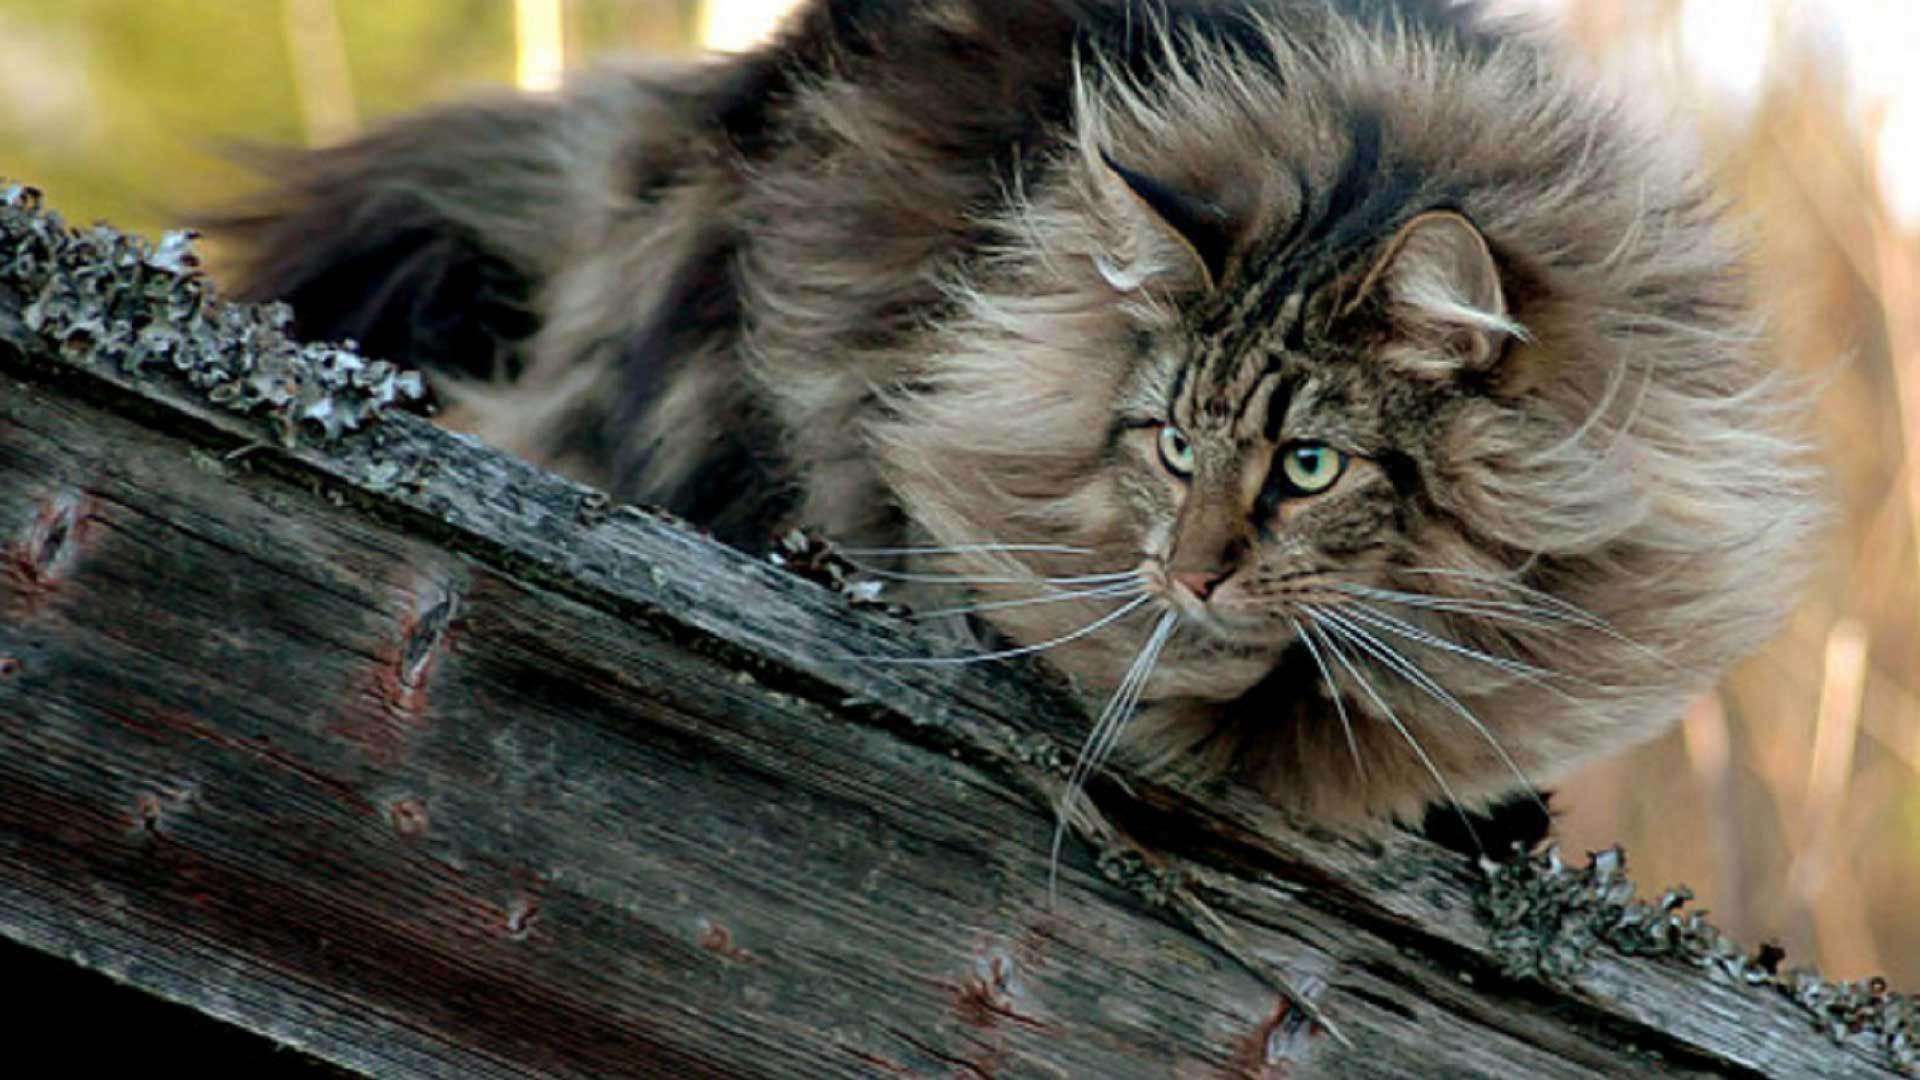 Fluffy Norwegian Forest Cat wallpaper and image